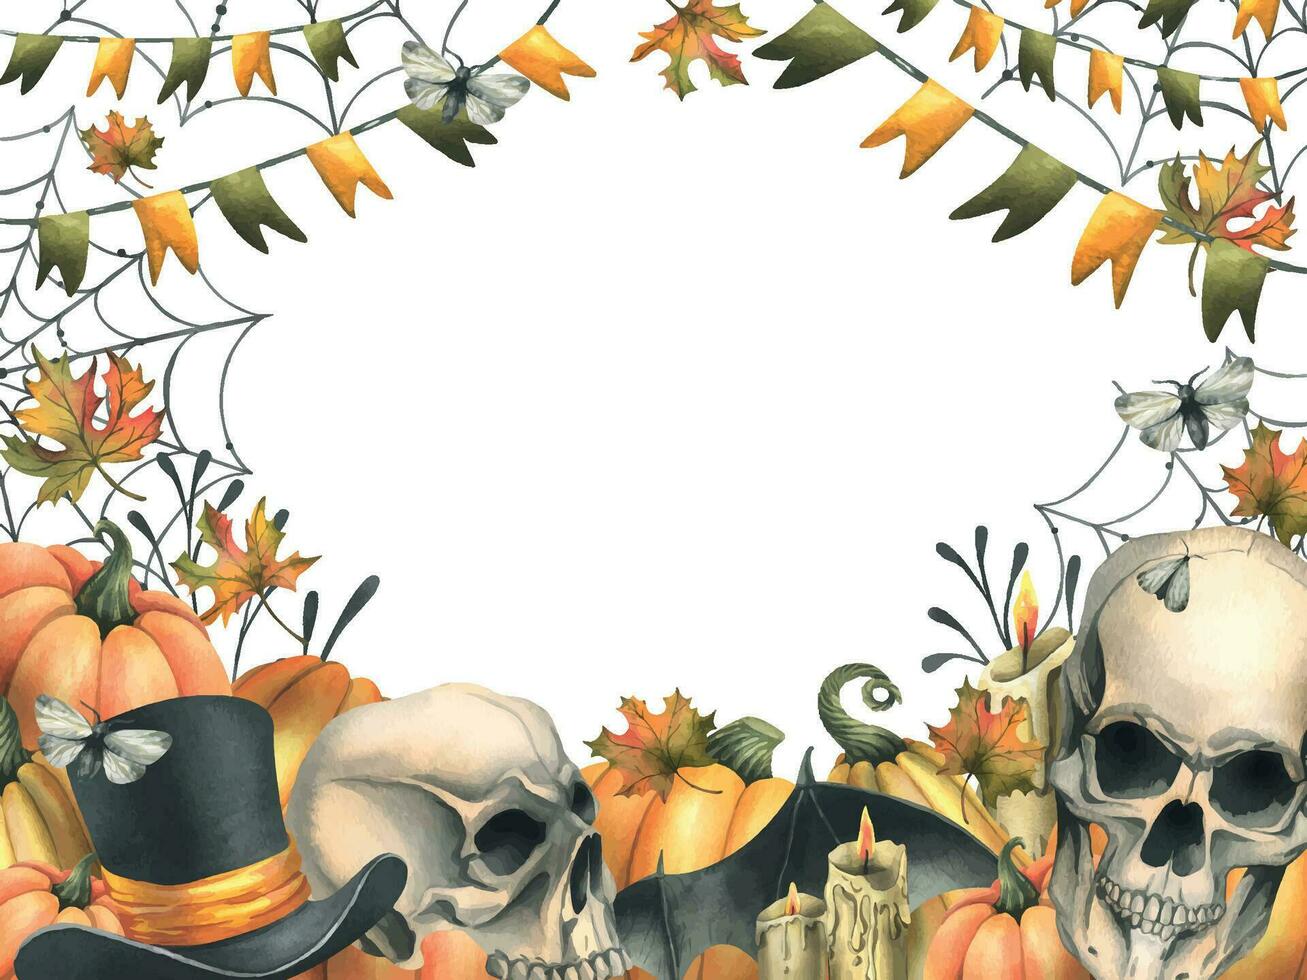 Human skulls with black witch hat, orange pumpkins, cobwebs, candles and autumn maple leaves. Hand drawn watercolor illustration for Halloween. Frame, template vector